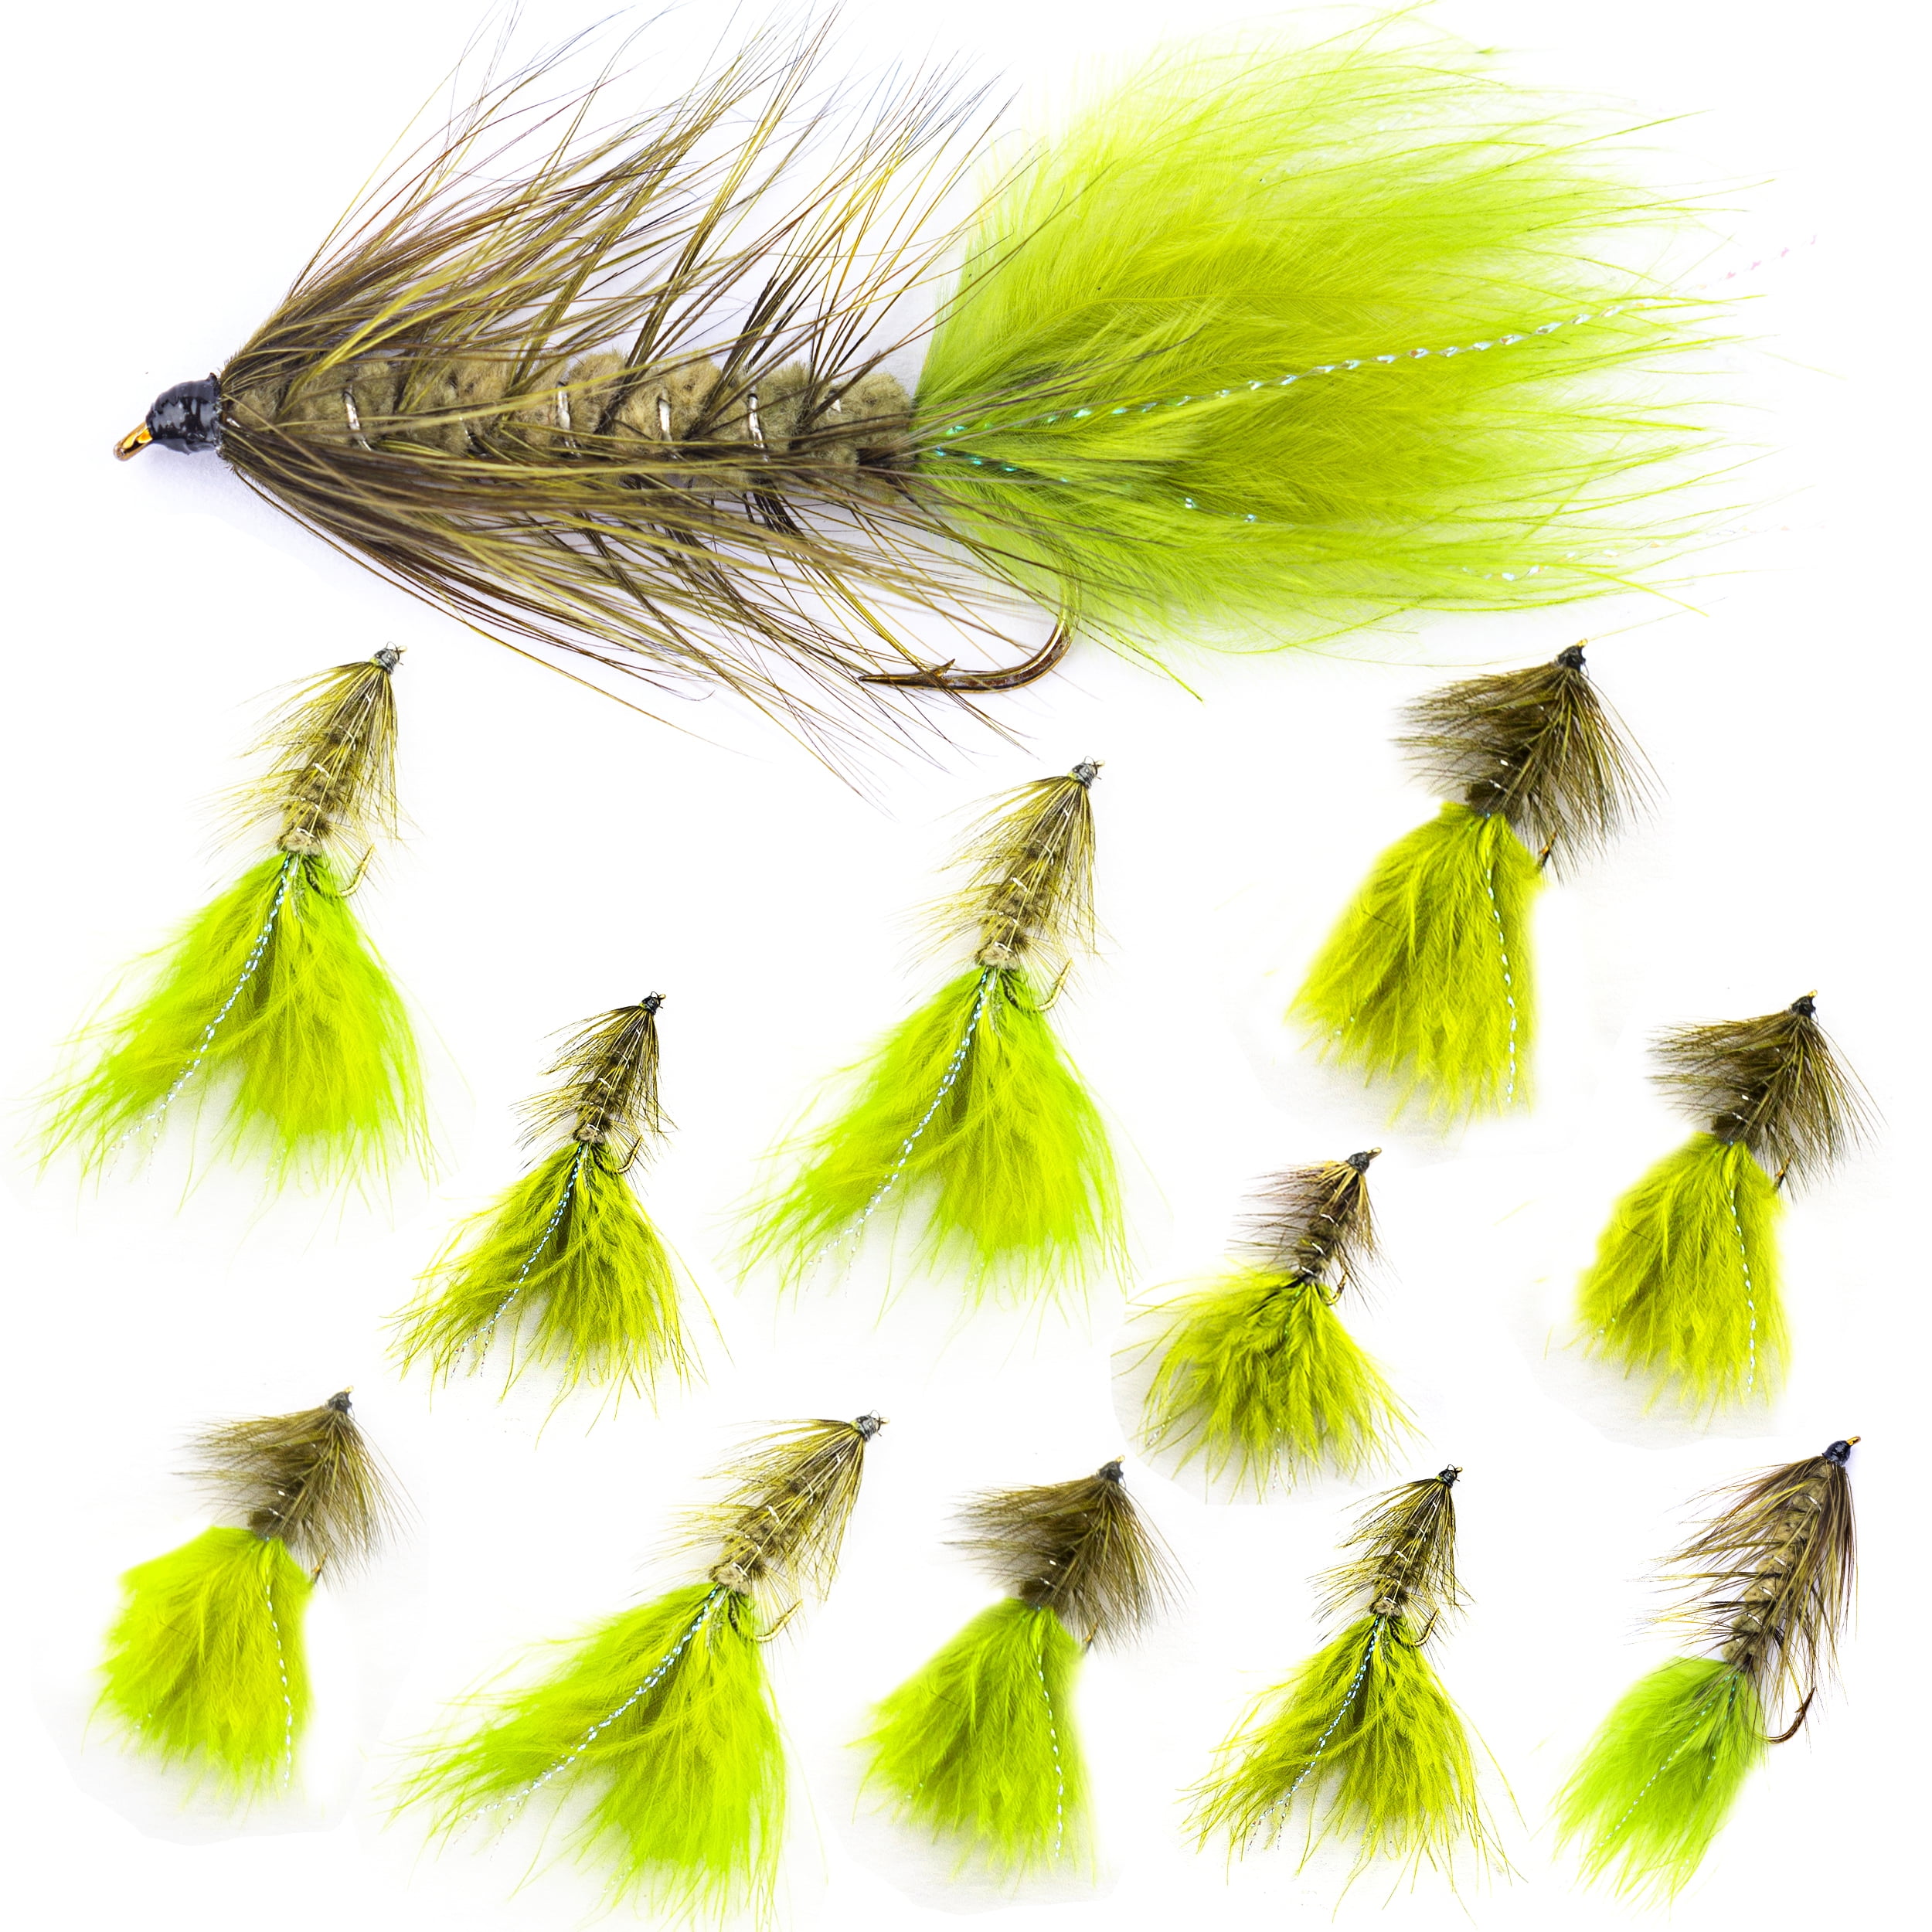 Wooly Worm Assortment - 12pc Fly Fishing Wet/Streamer Flies for Trout,  Salmon, Bass and Freshwater Fish - 4 Collor Variety - Great Wooly Bugger